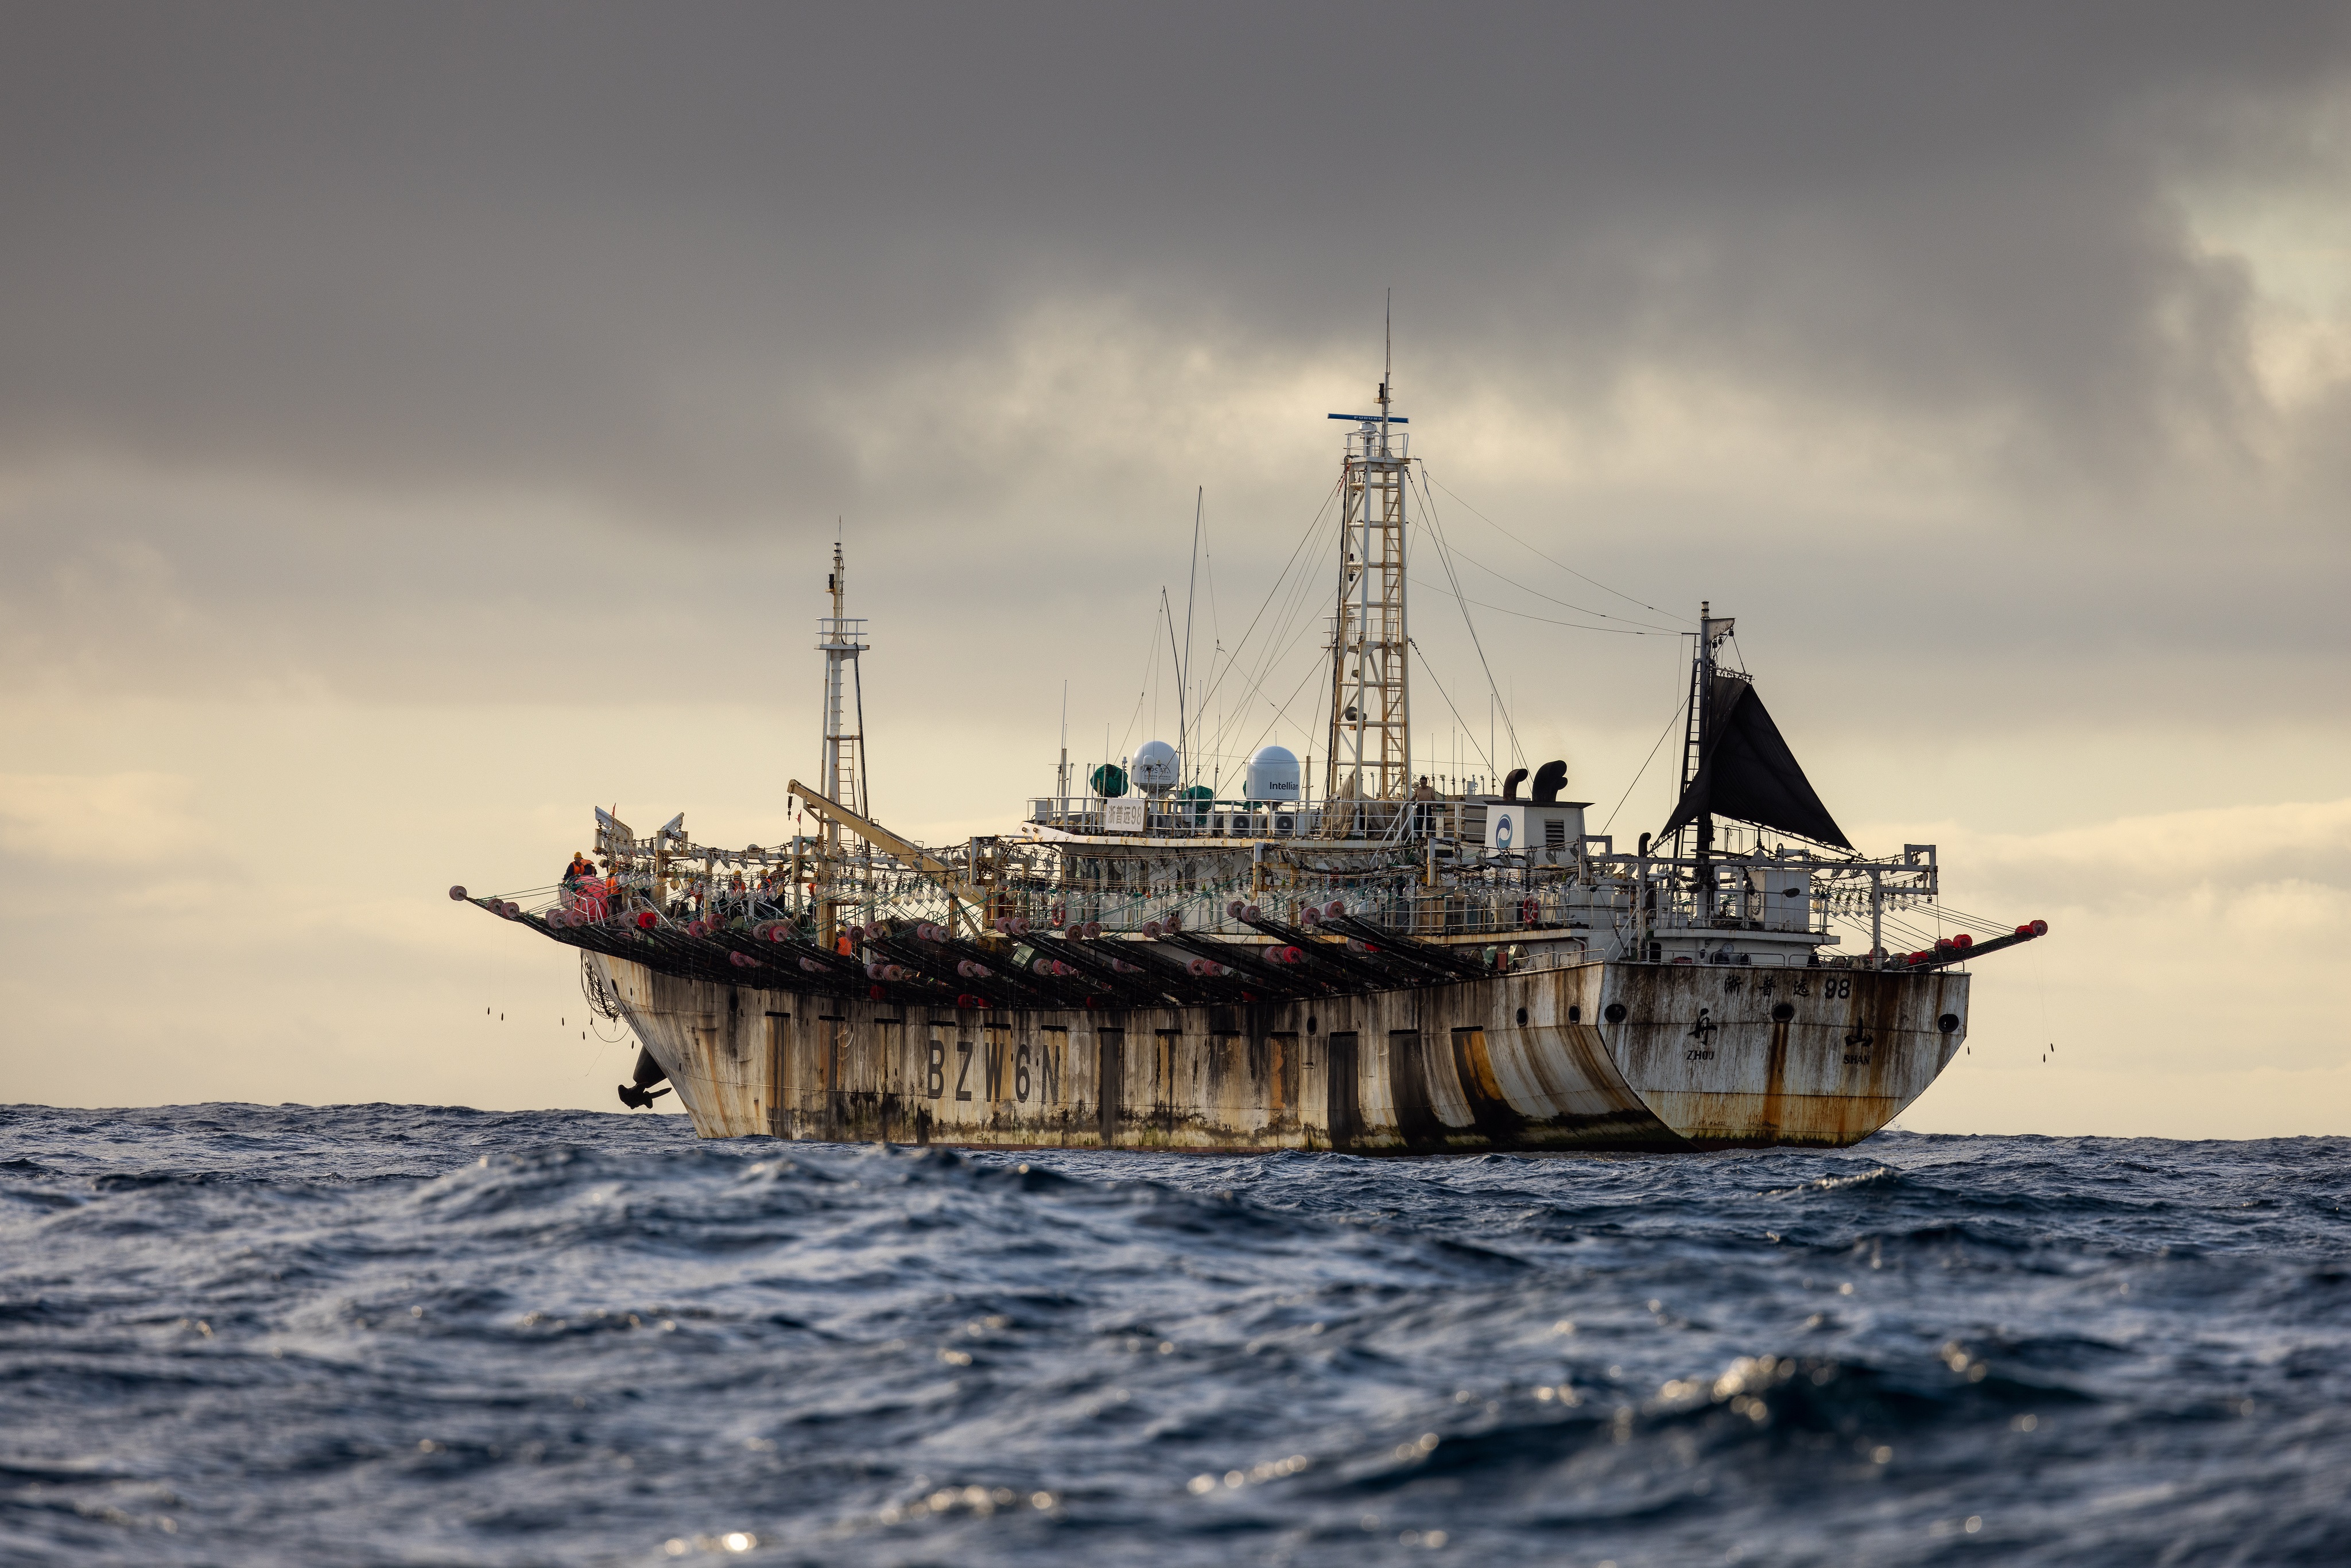 From Bait to Plate – Tracking the Chinese Fishing Ships Linked to